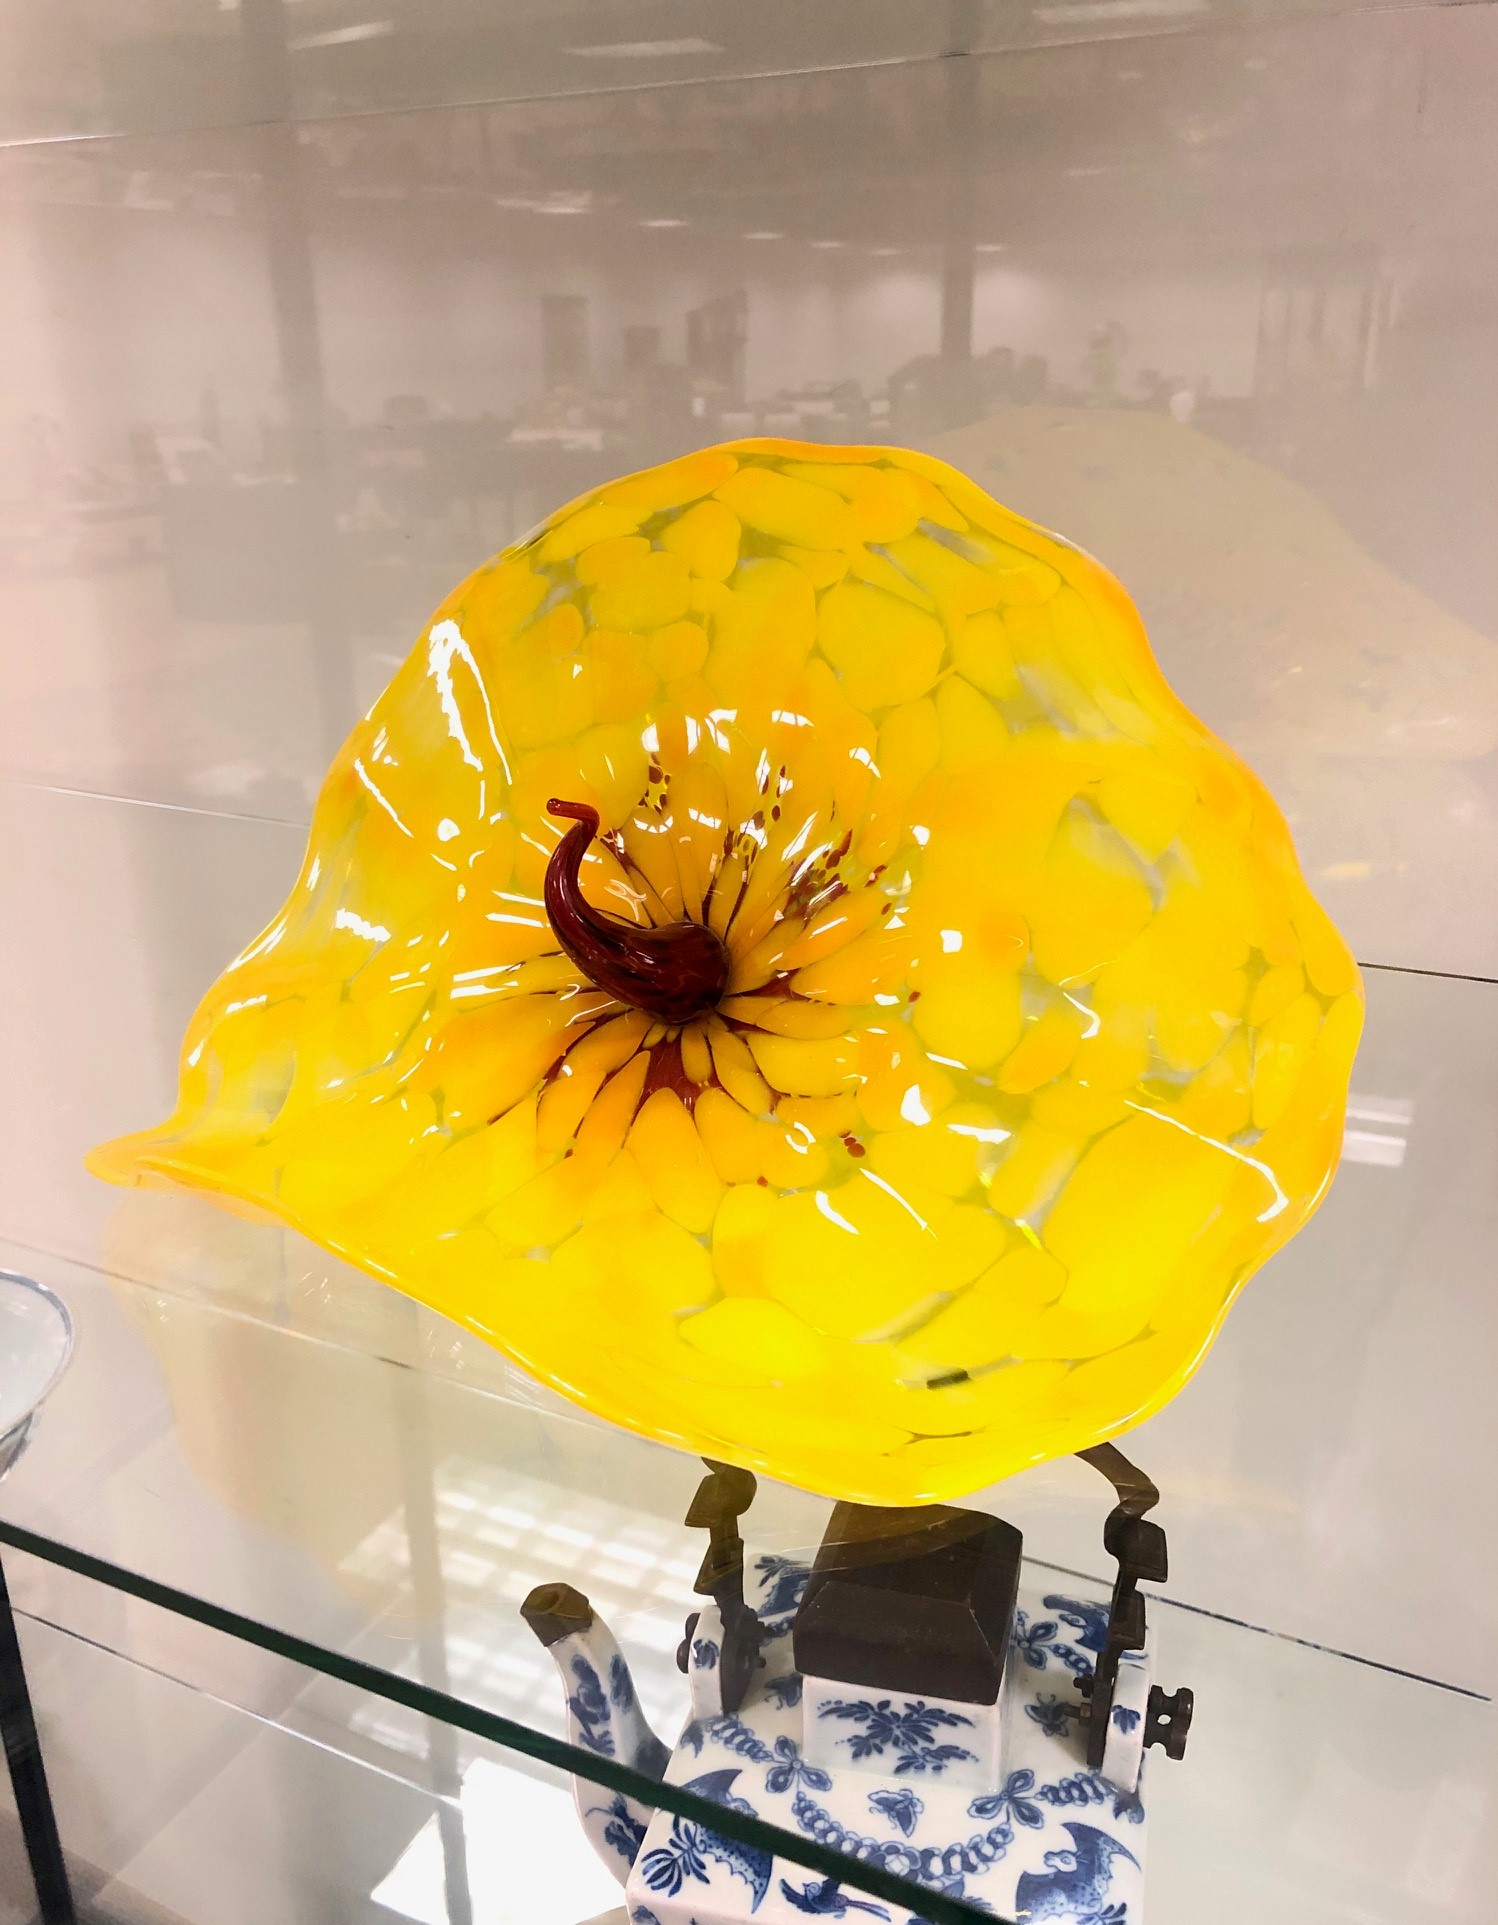 Dale Chihuly "Bel Fiore" Glass Sculpture - Image 3 of 5